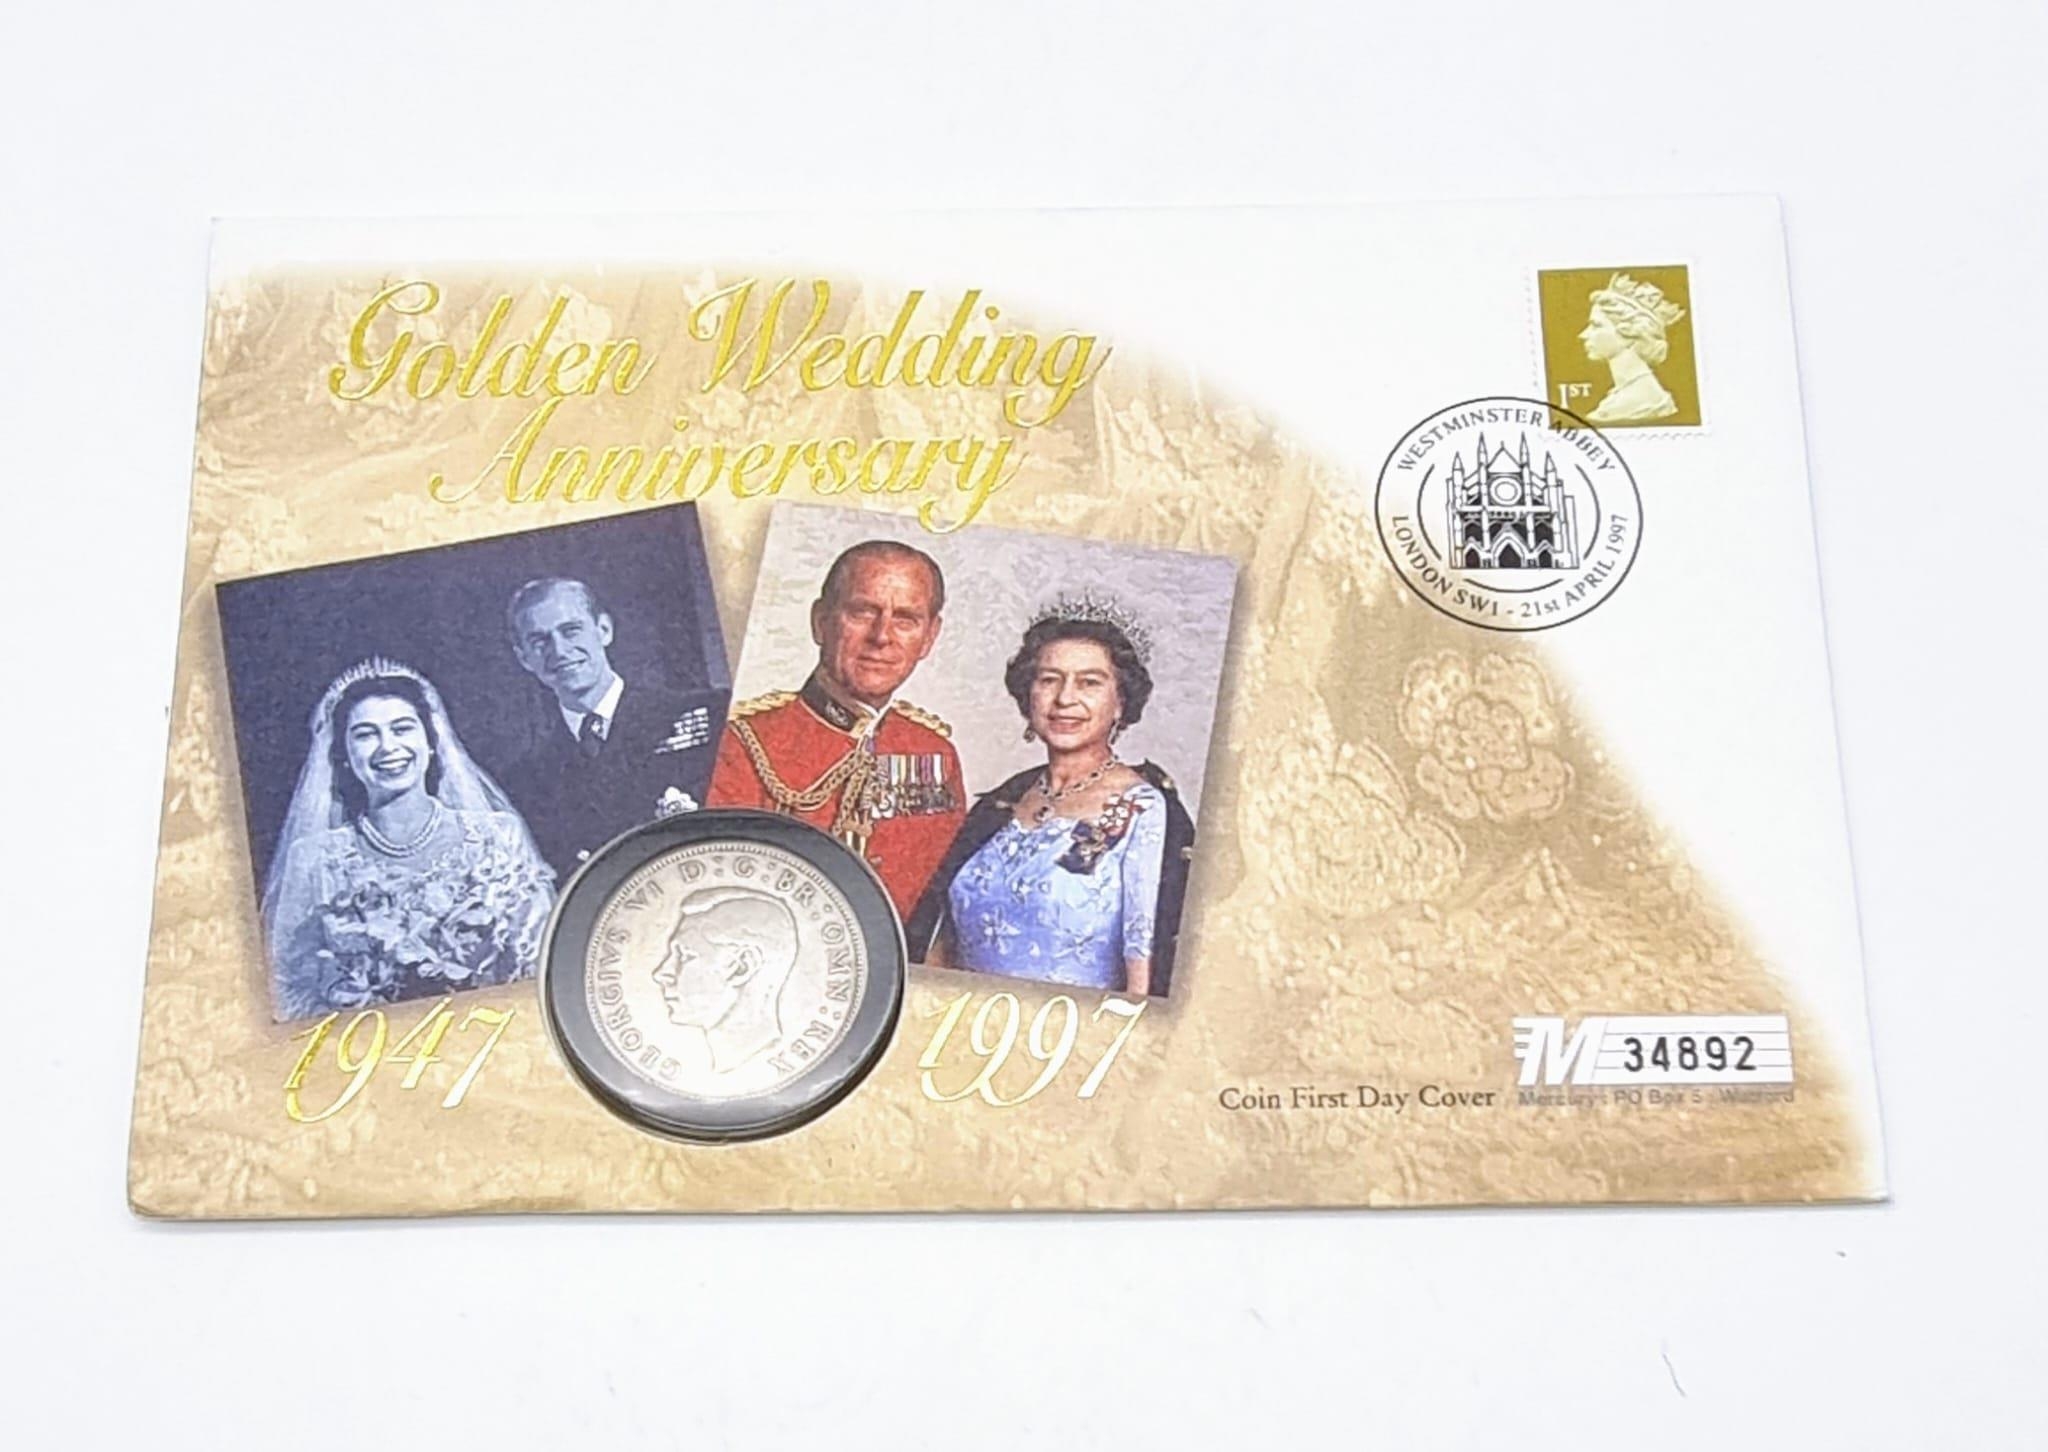 A 1947 Silver George V1 Half Crown and 1997 First Day Cover Set Commemorating the Queens Golden